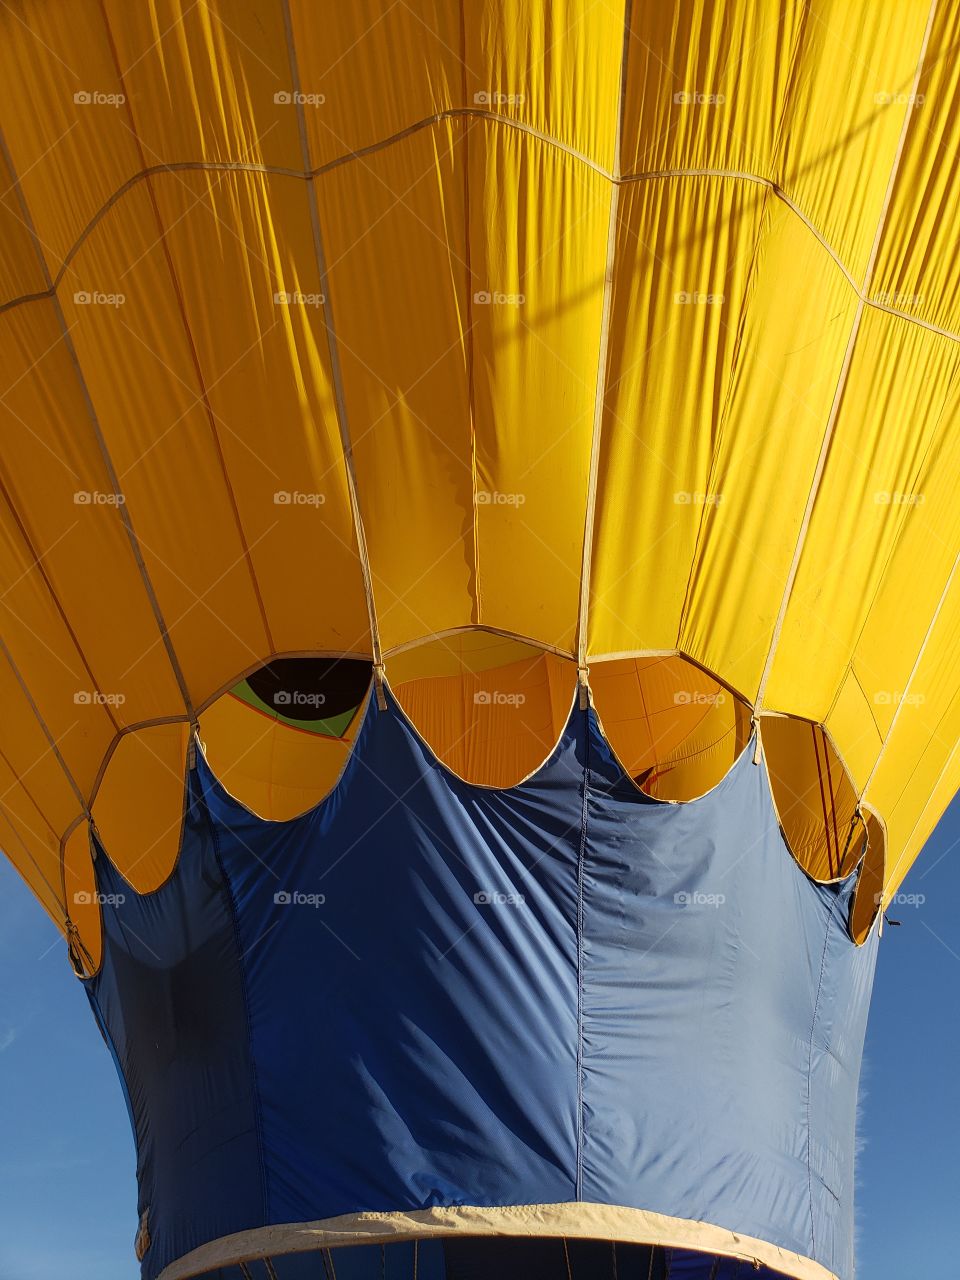 Lower part of a hot air balloon as it gets inflated. Bright yellow against blue sky background.